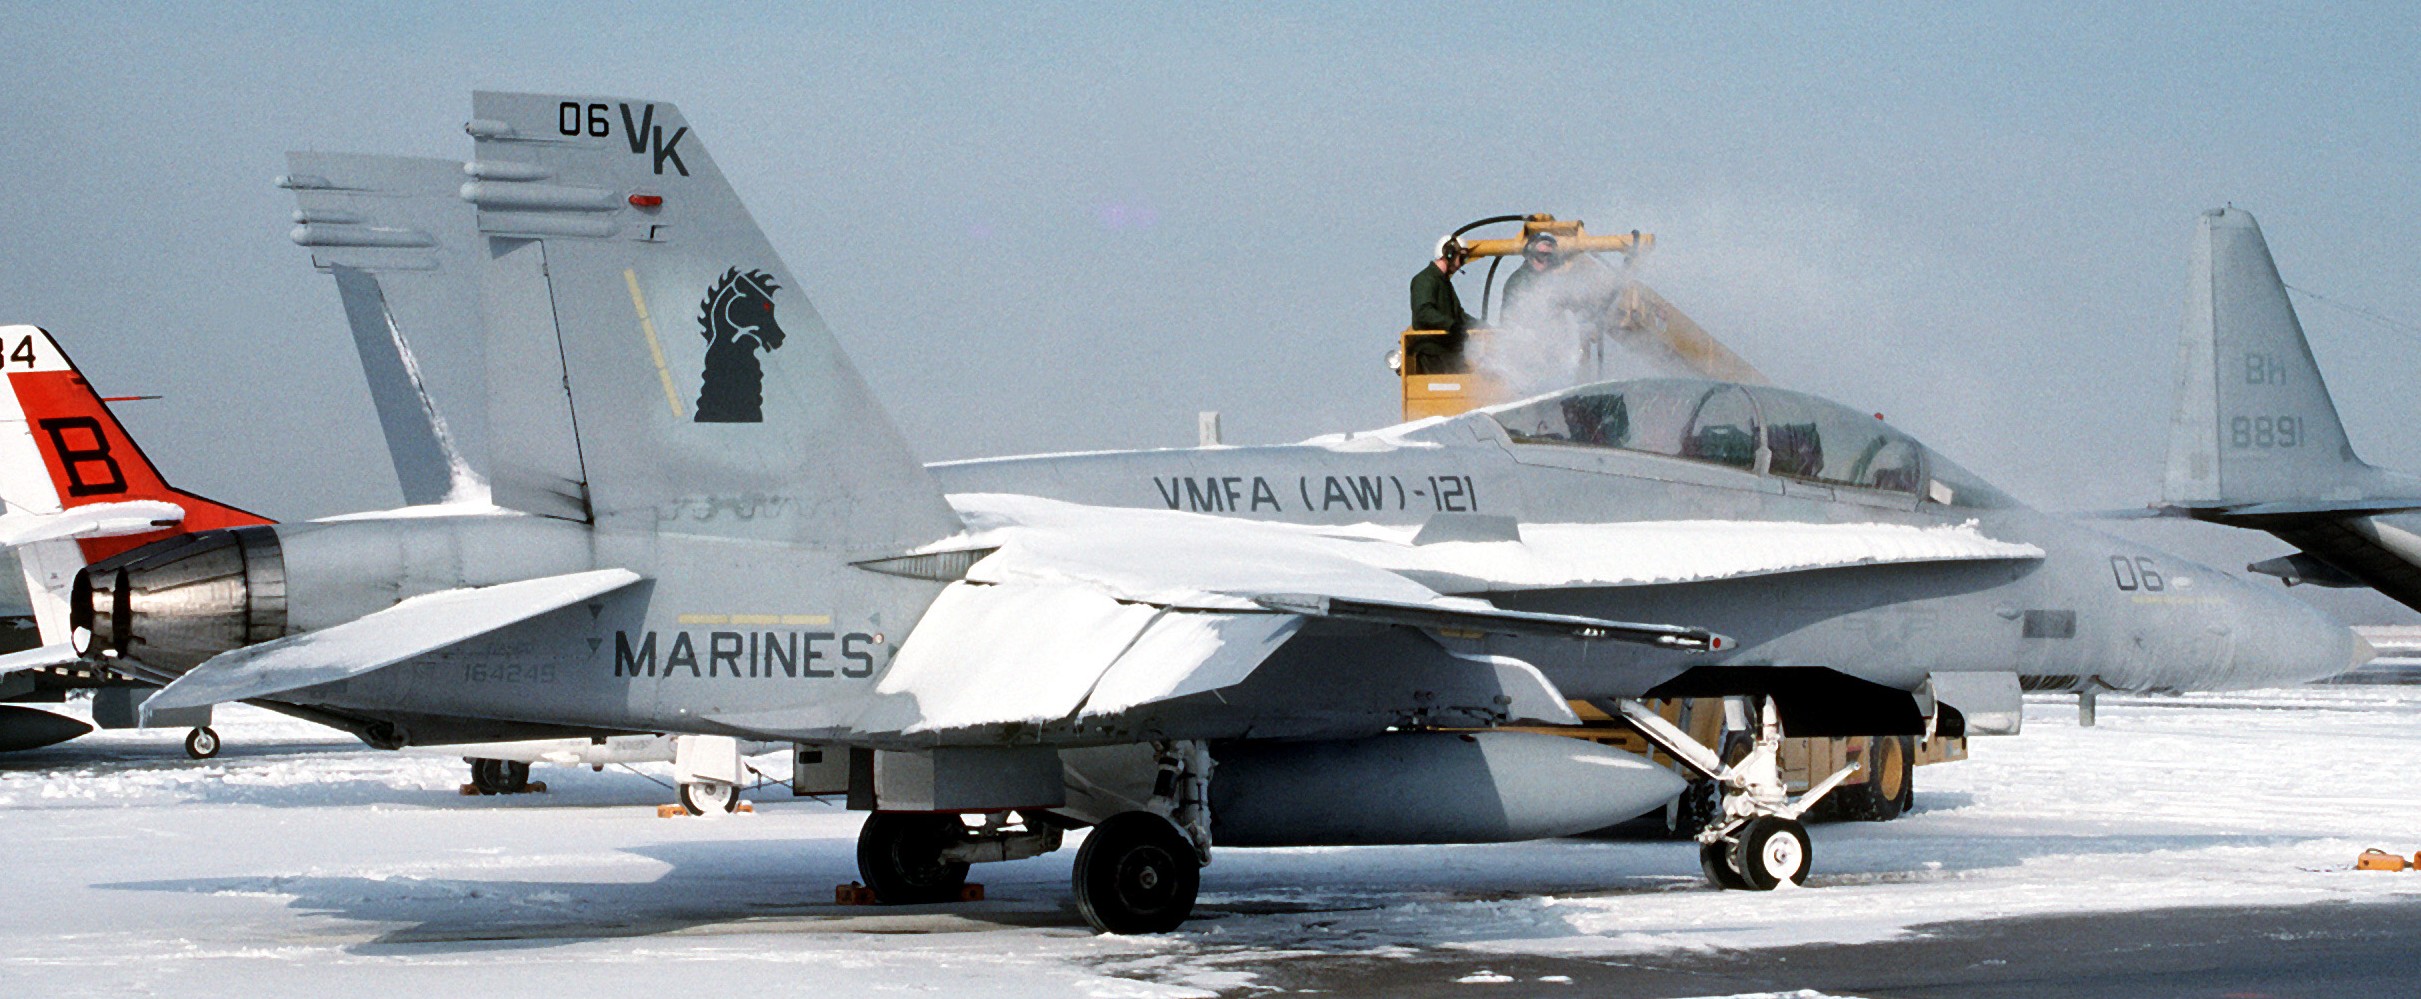 vmfa(aw)-121 green knights marine fighter attack squadron f/a-18d hornet 14